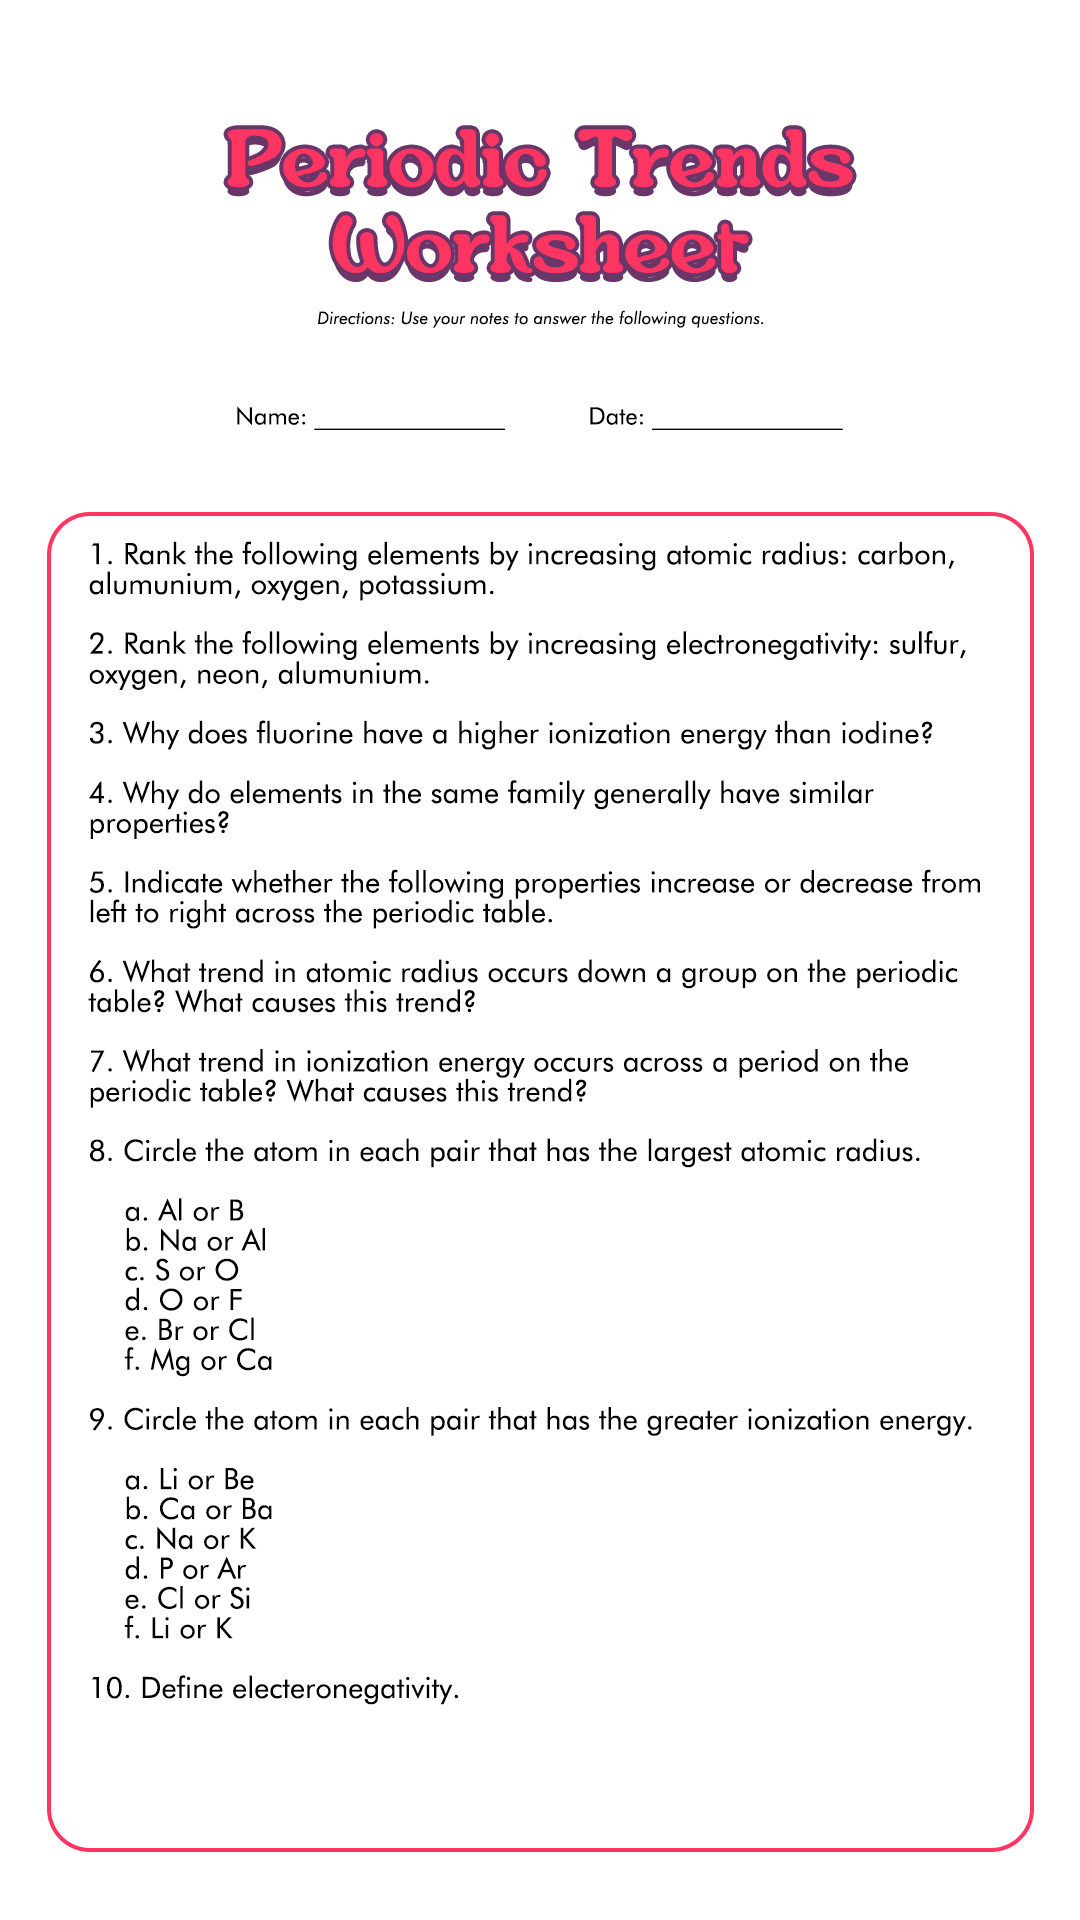 Periodic Table Trends Worksheet Answer Key Image